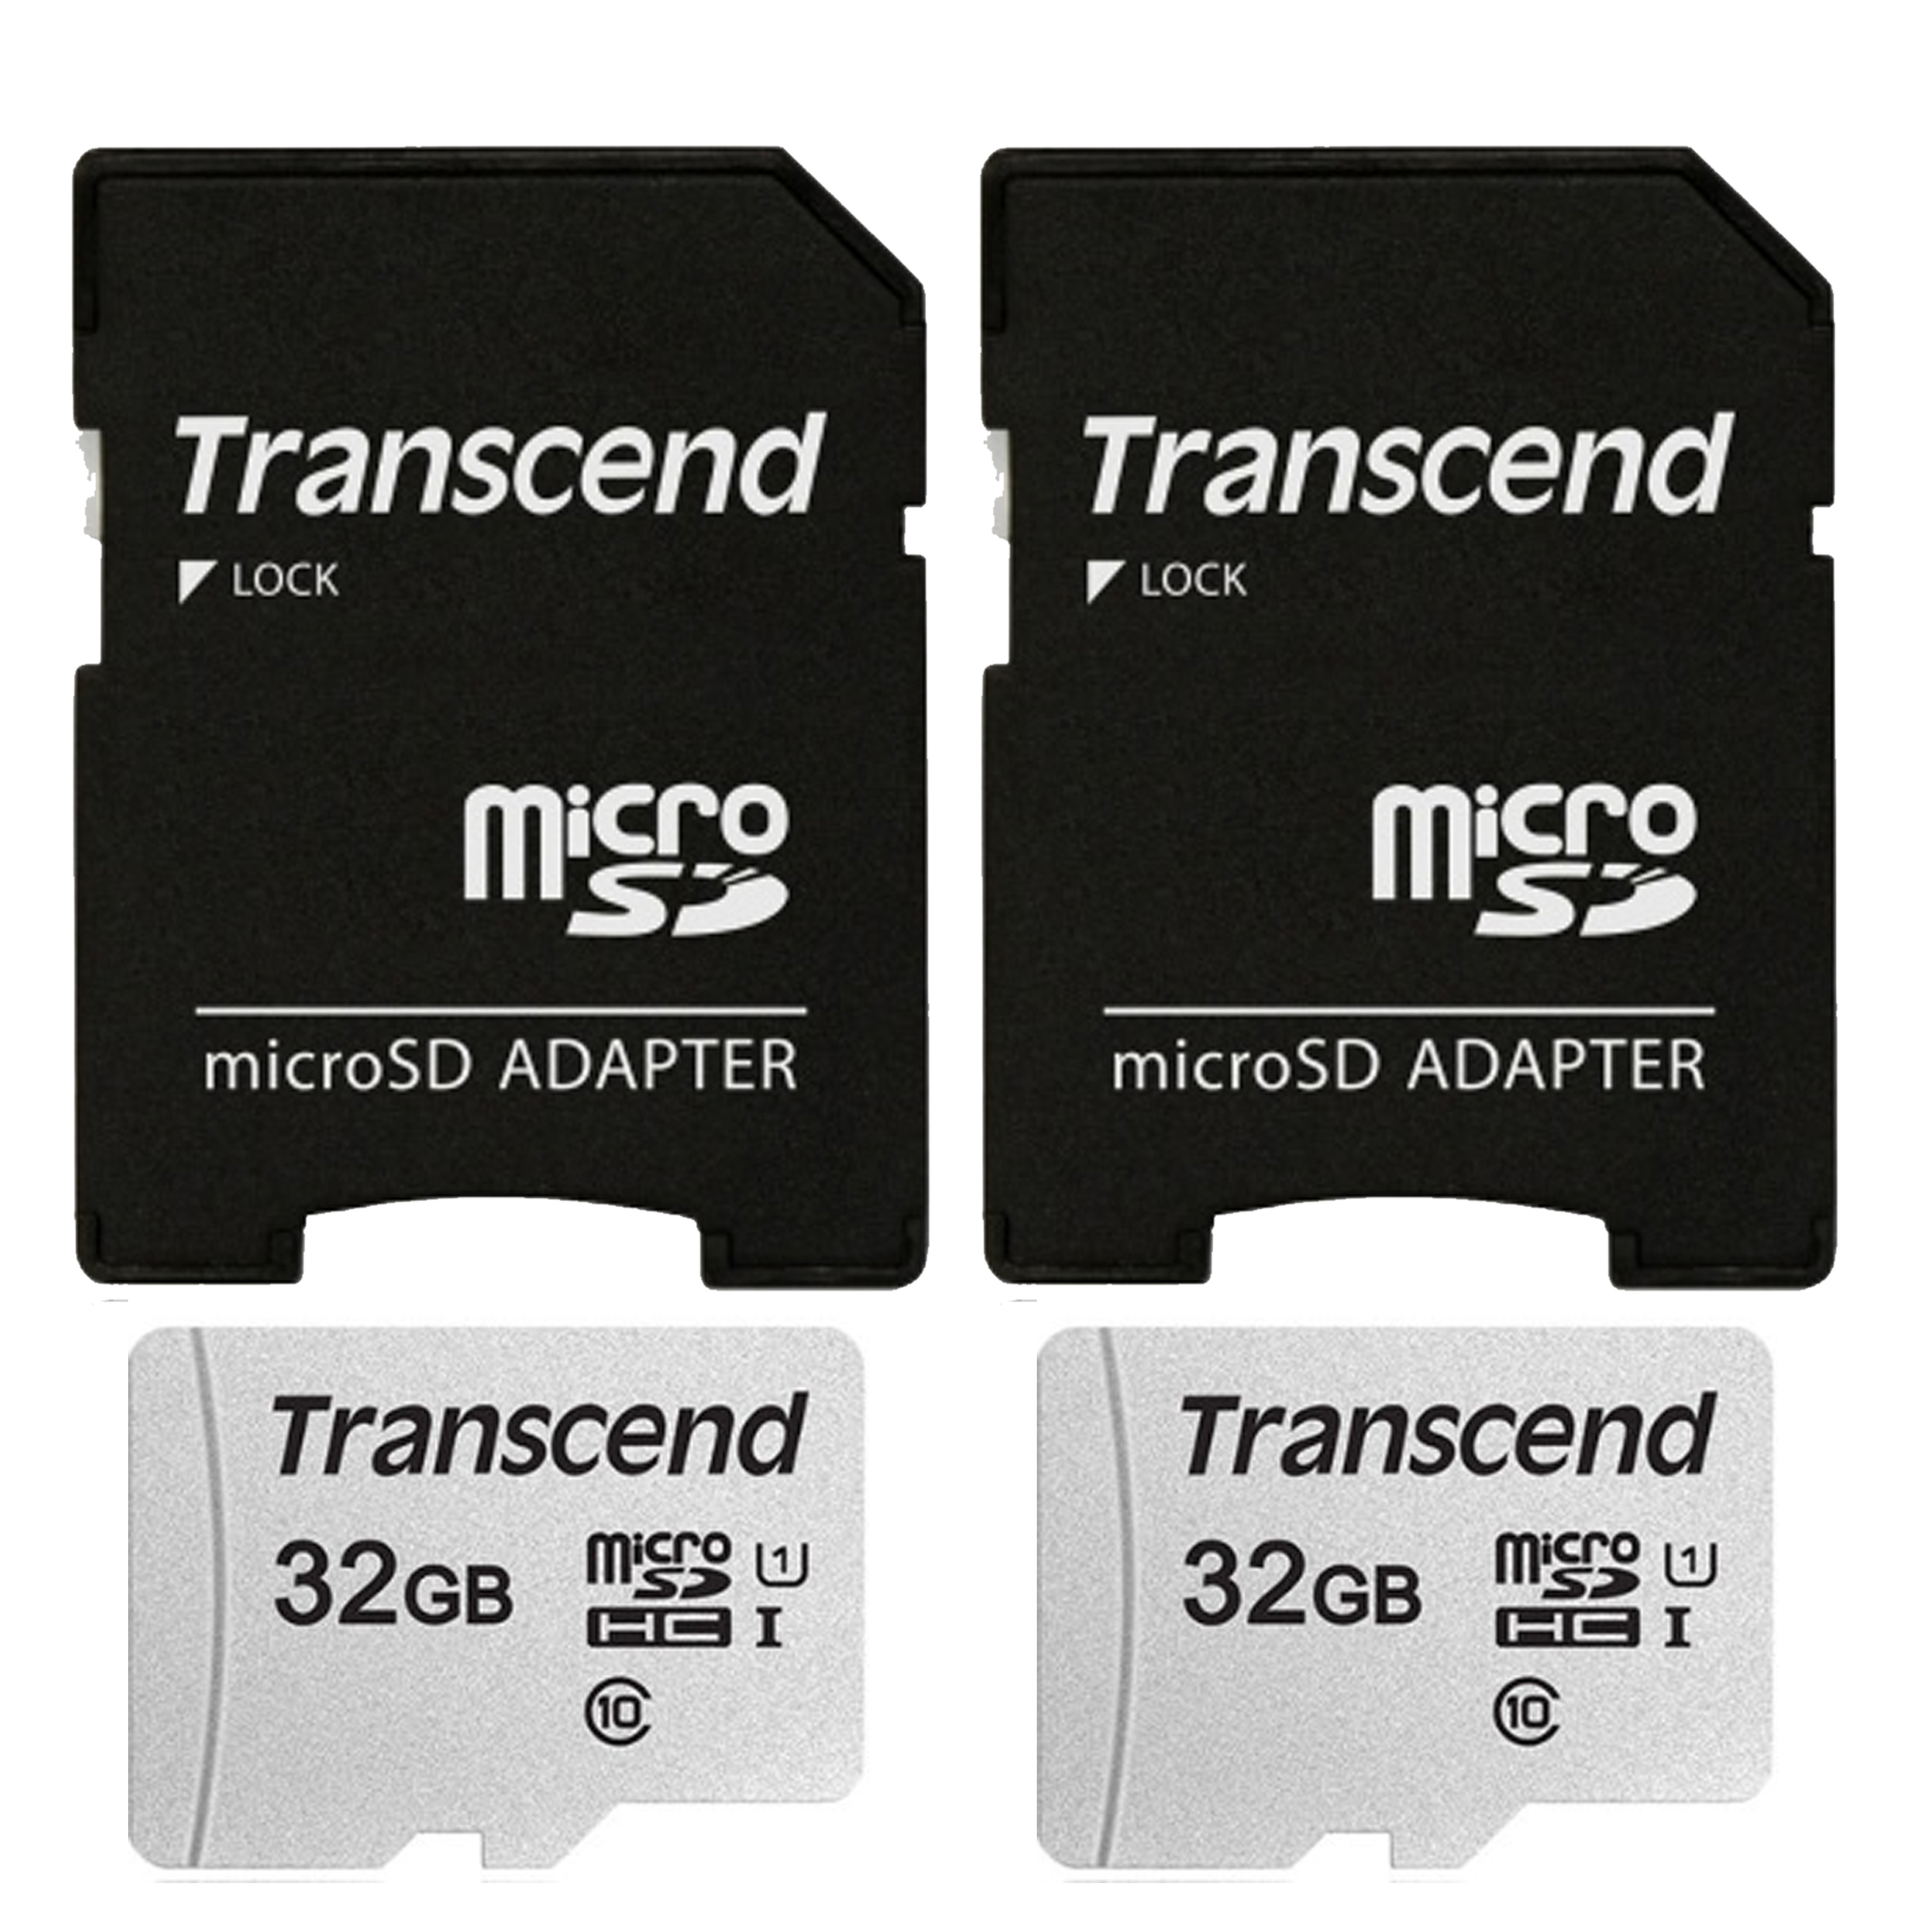 Transcend Two Transcend 32GB MicroSD 300s 100MB/s Class 10 Micro SDHC Memory Card with SD Adapter